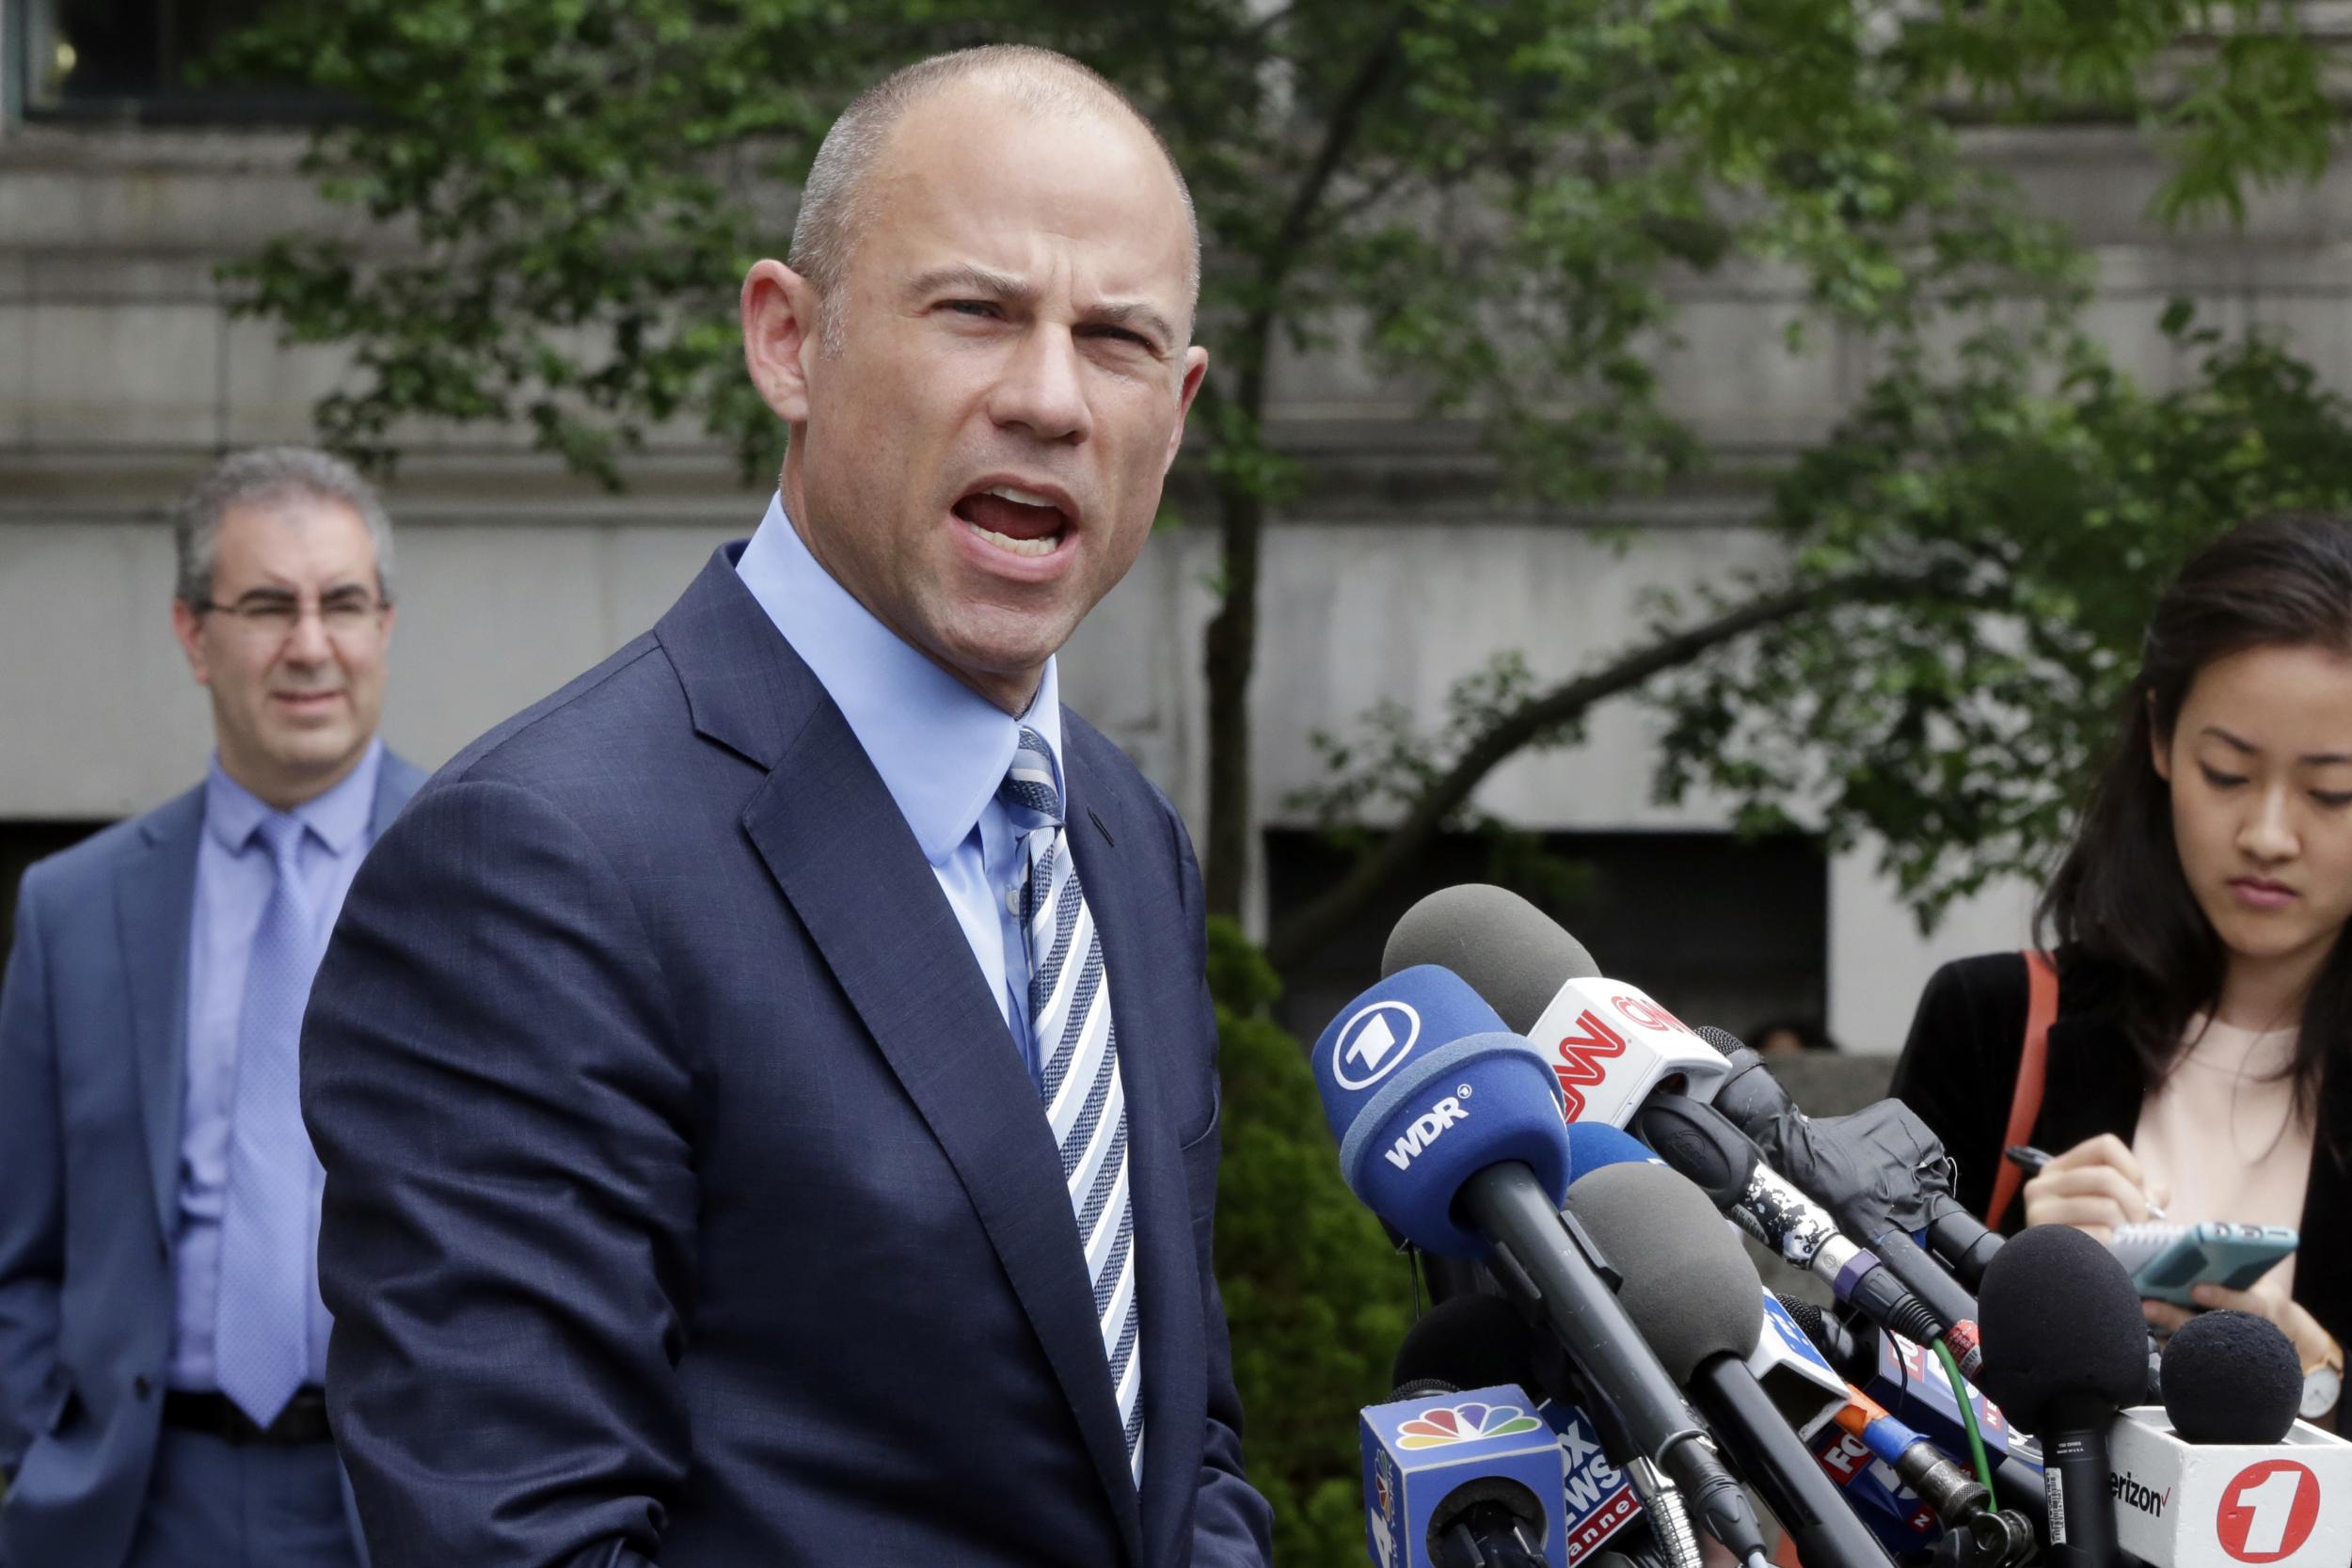 Michael Avenatti, attorney for porn actress Stormy Daniels, talks to the media after a Federal Court hearing in New York